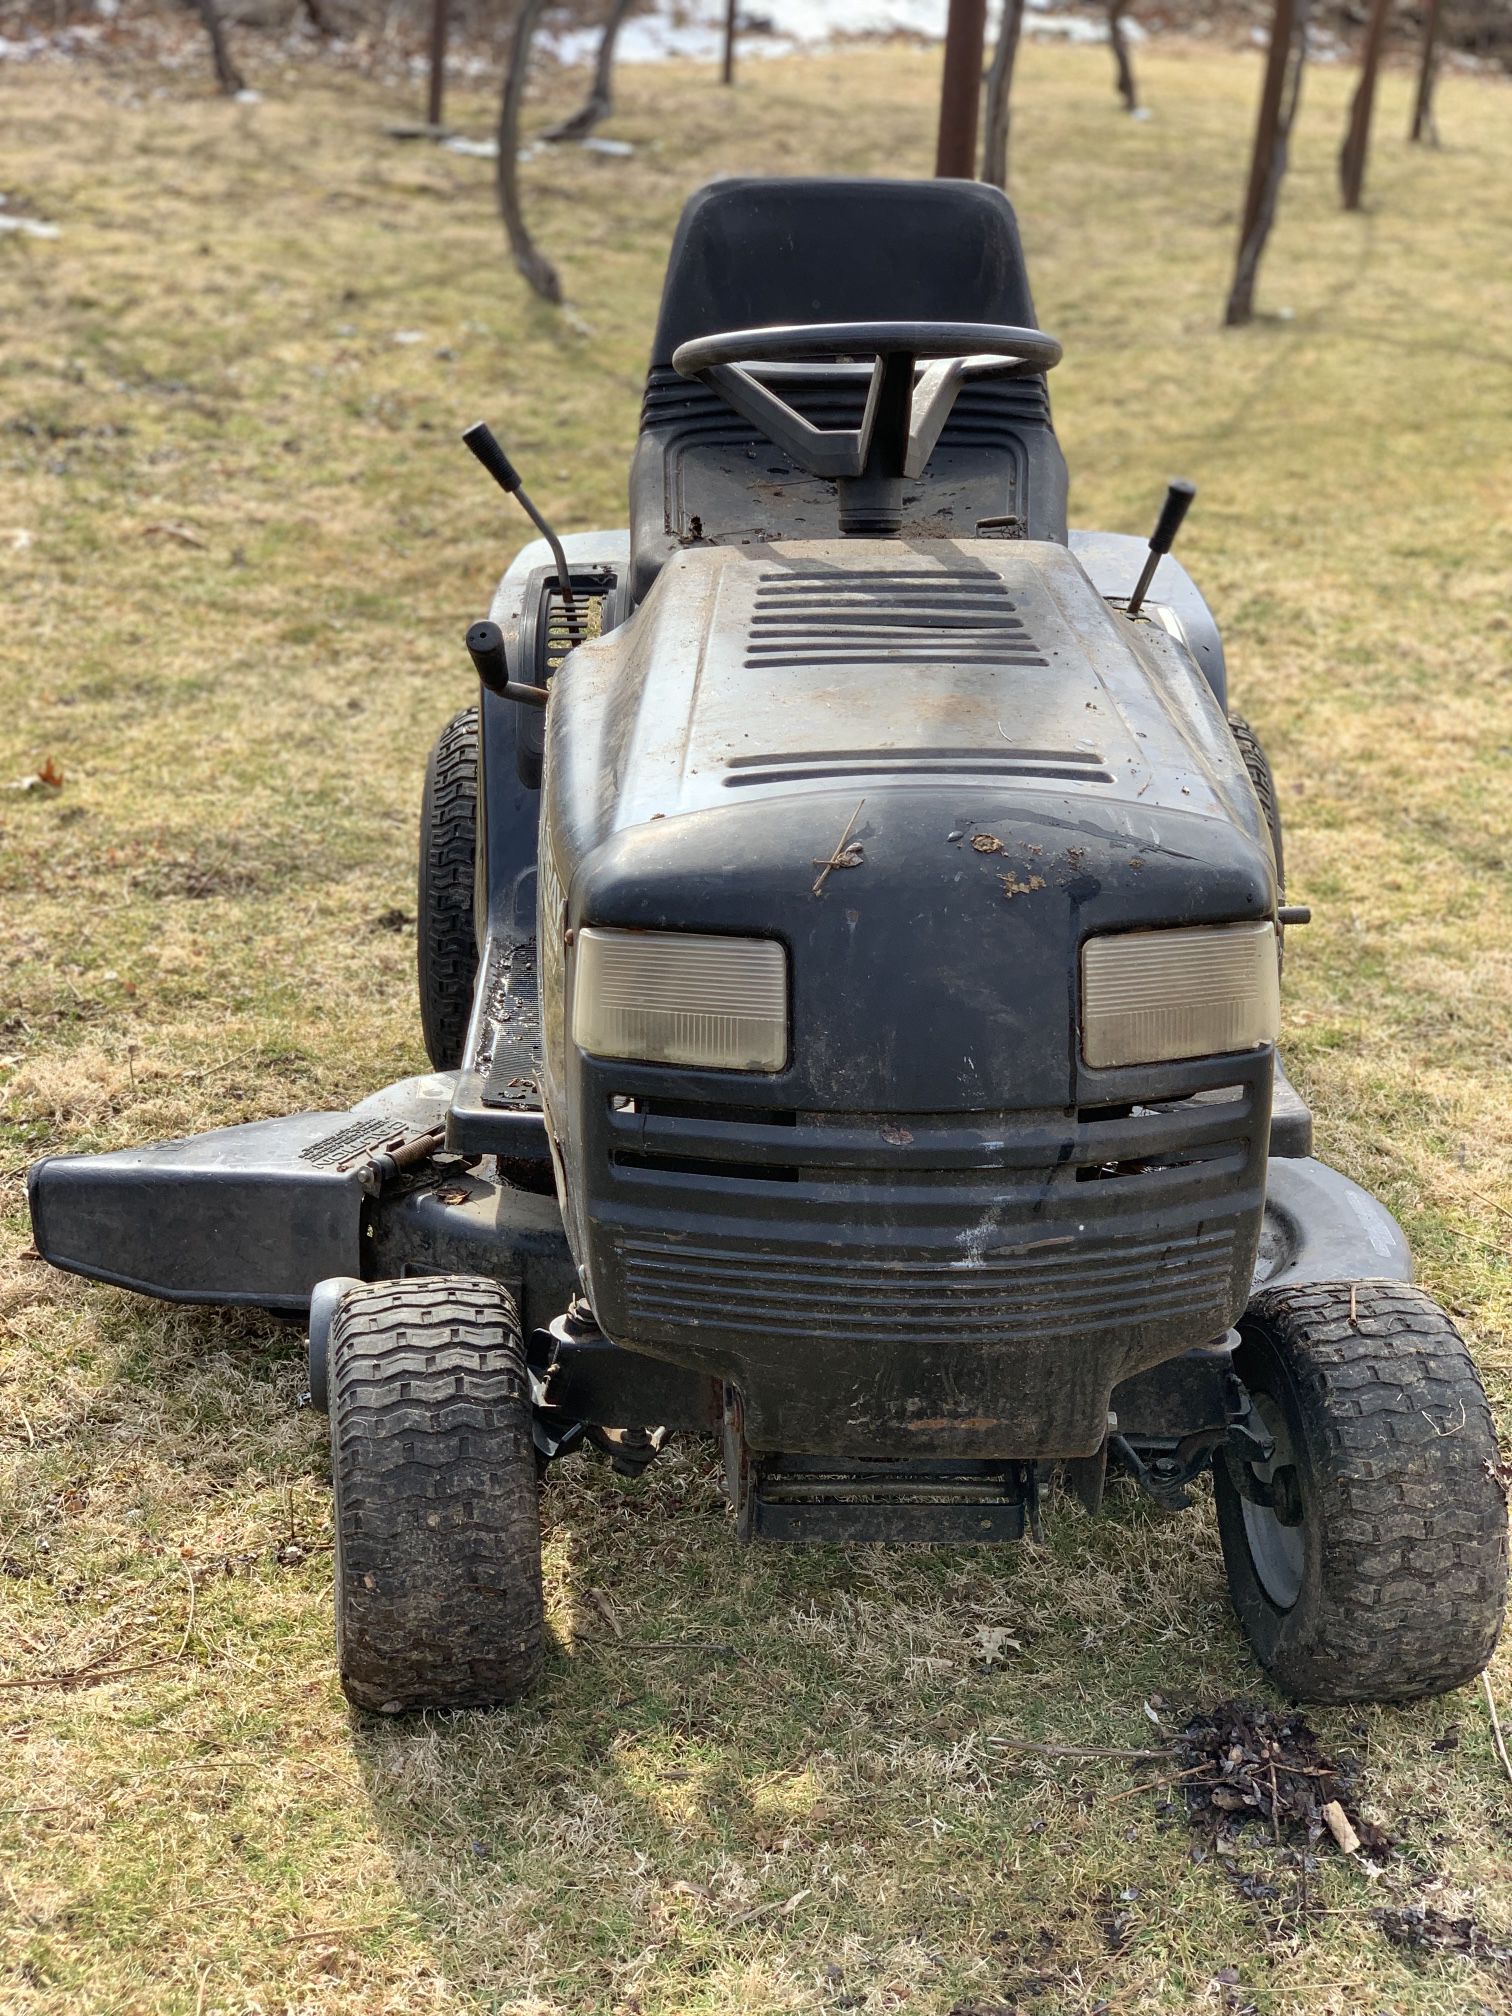 42" Murray Ride On Lawn Mower 